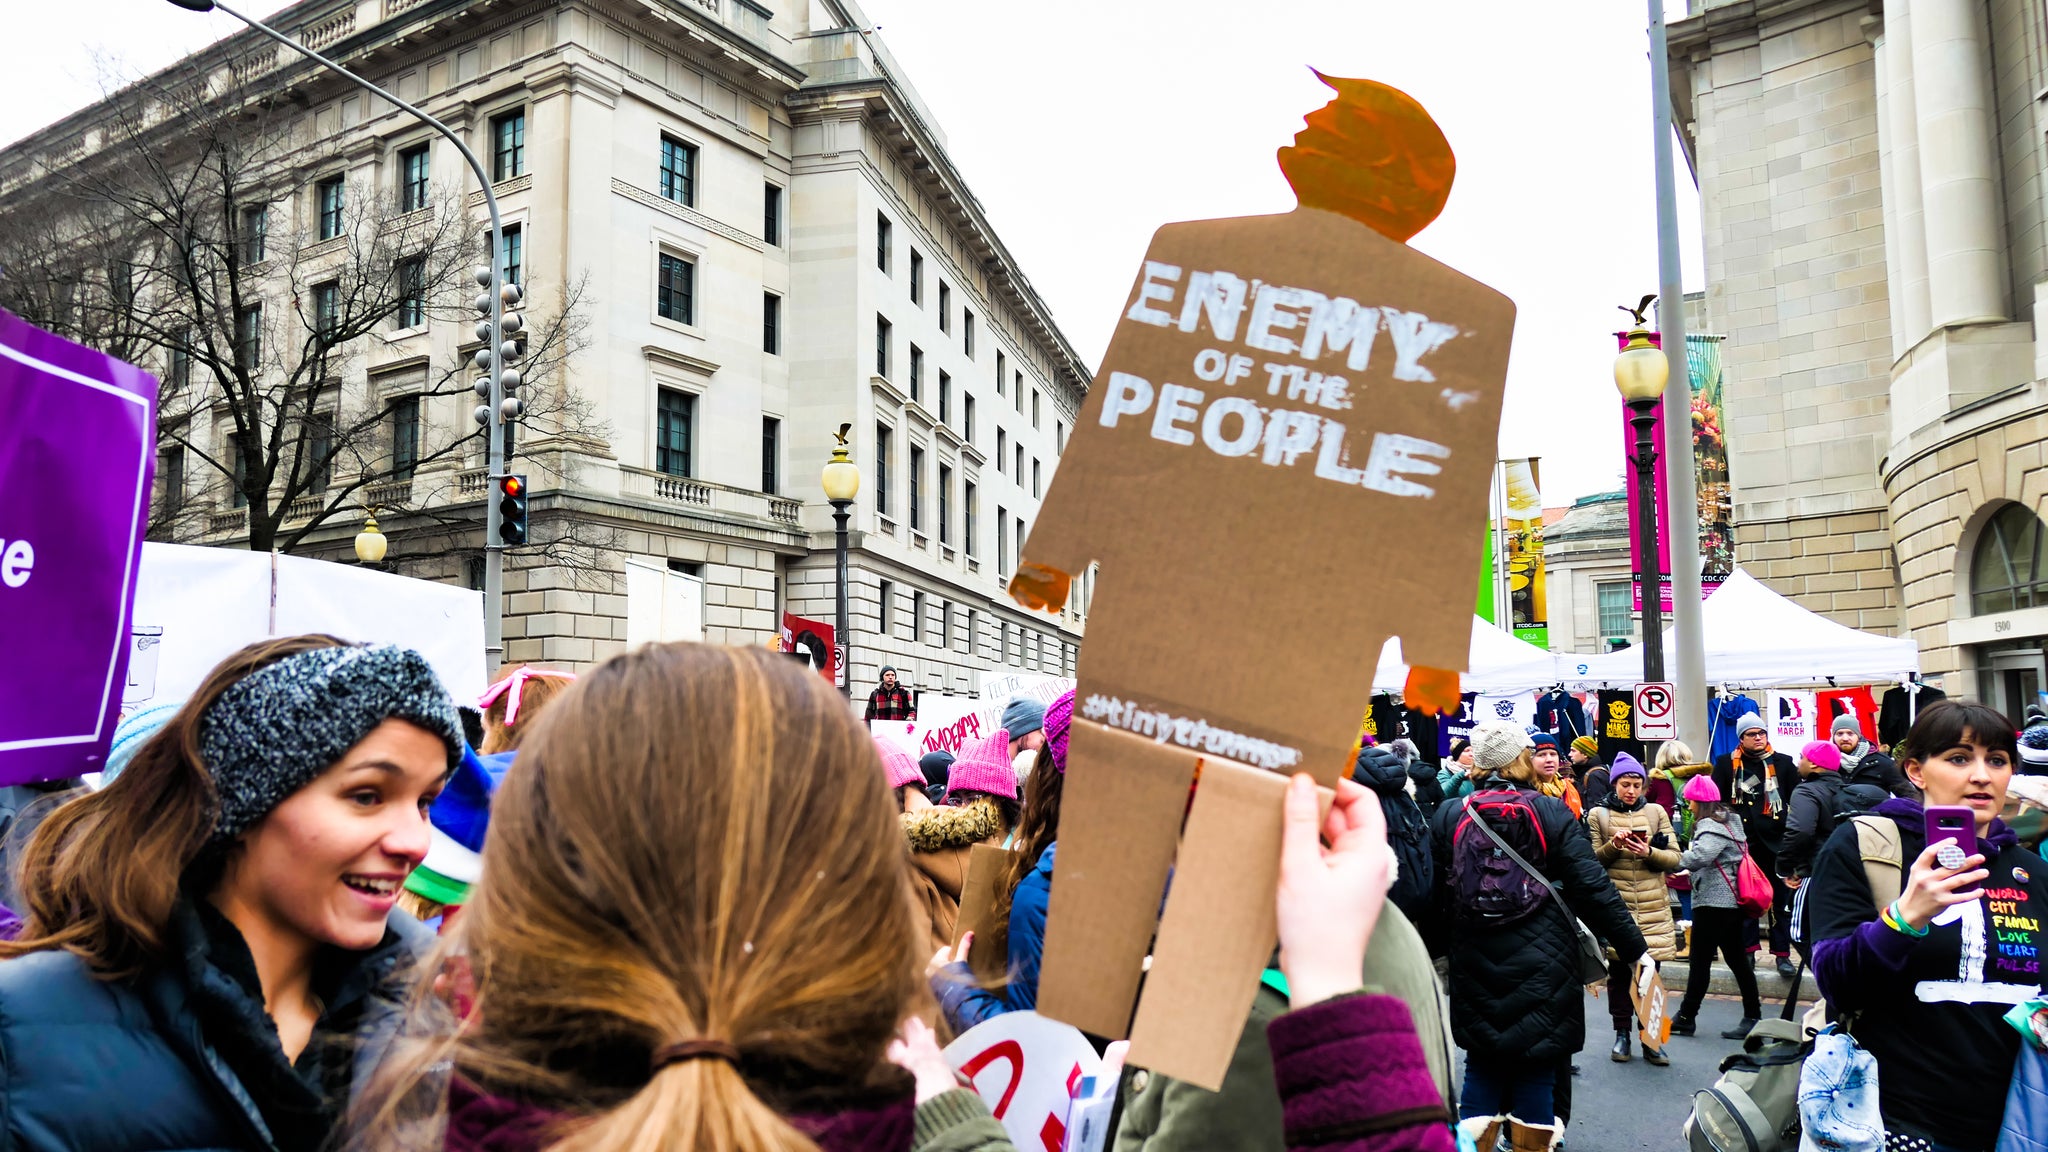 Protester at a march holding a 2 foot tall, cardboard tiny trump that has "Enemy of the People" stamped on it